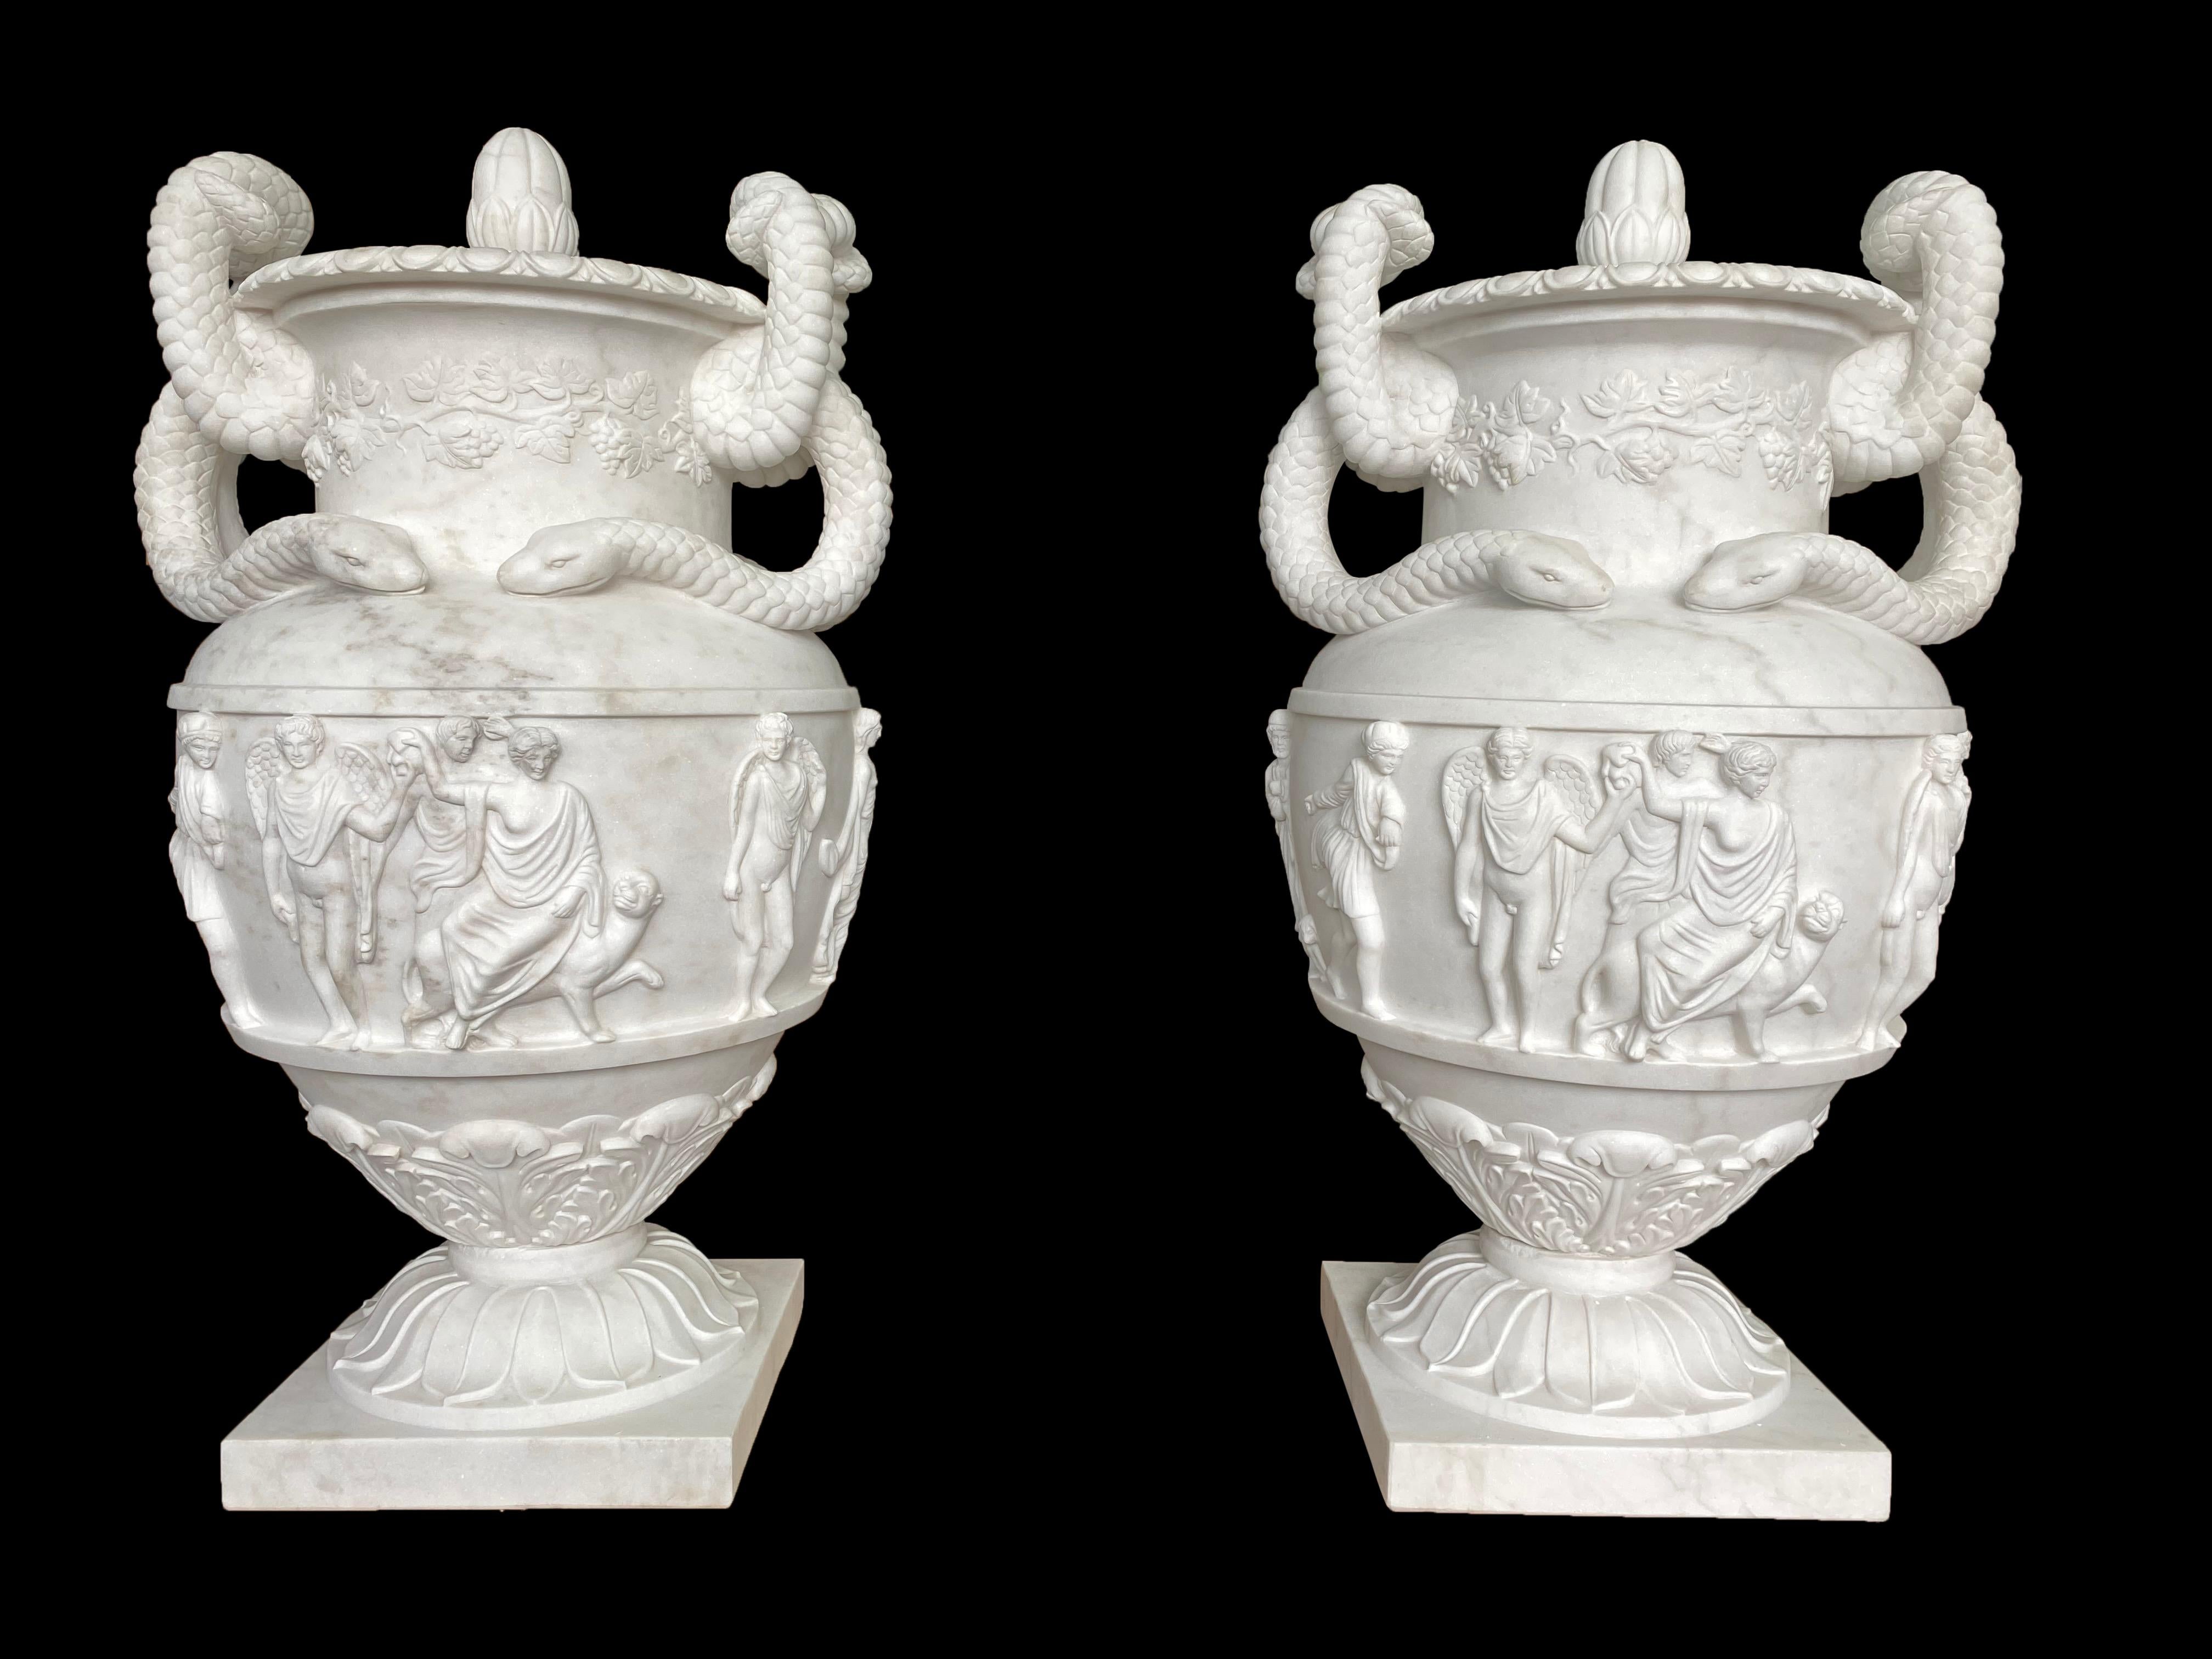 A monumental pair of regency style white Carrara marble urns, late 20th century. This magnificent pair of urns recalls the form of an Ancient Greek krater, a large vessel for mixing wine. The entire urn is dedicated to the God of Wine Bacchus